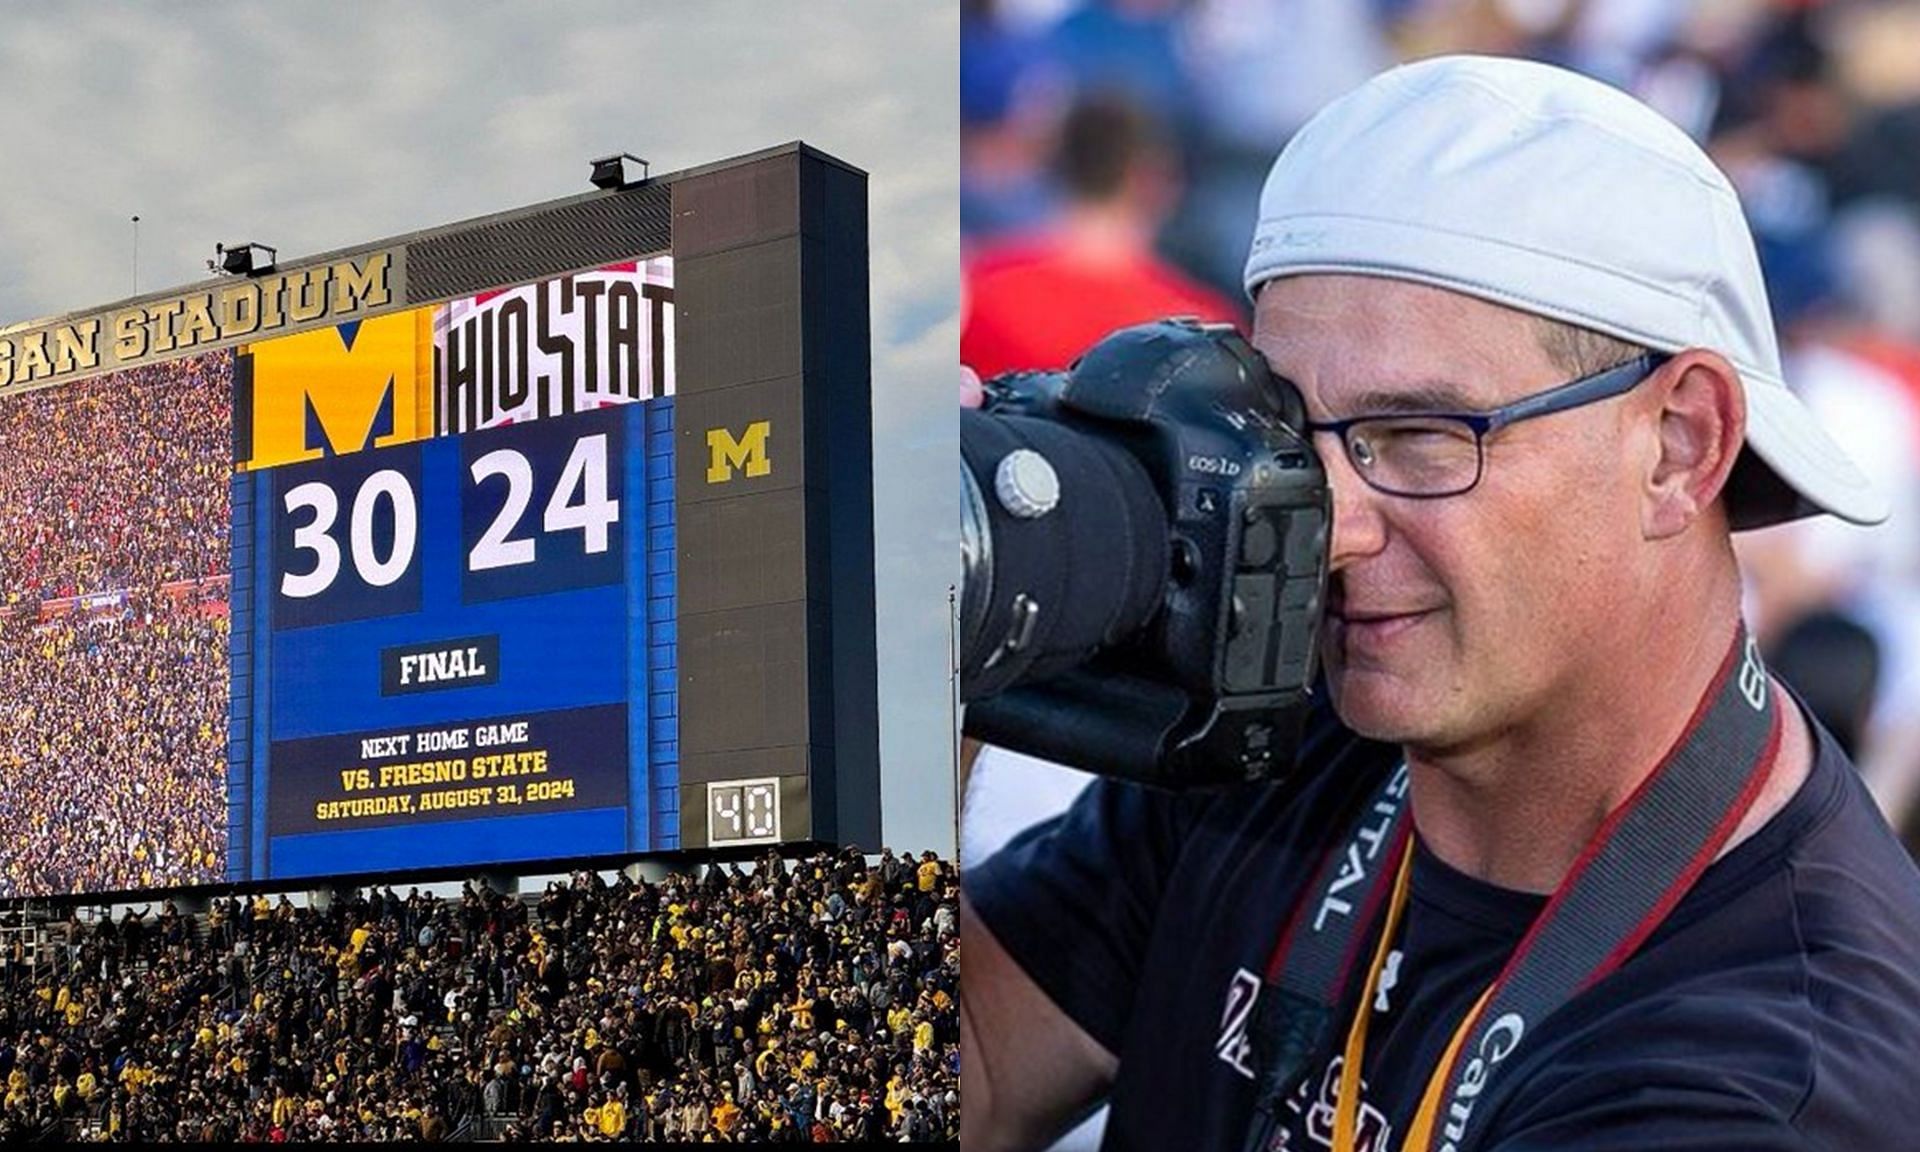 Ohio Photographer Aaron Josefczyk saved from near death at Michigan-Ohio State game 